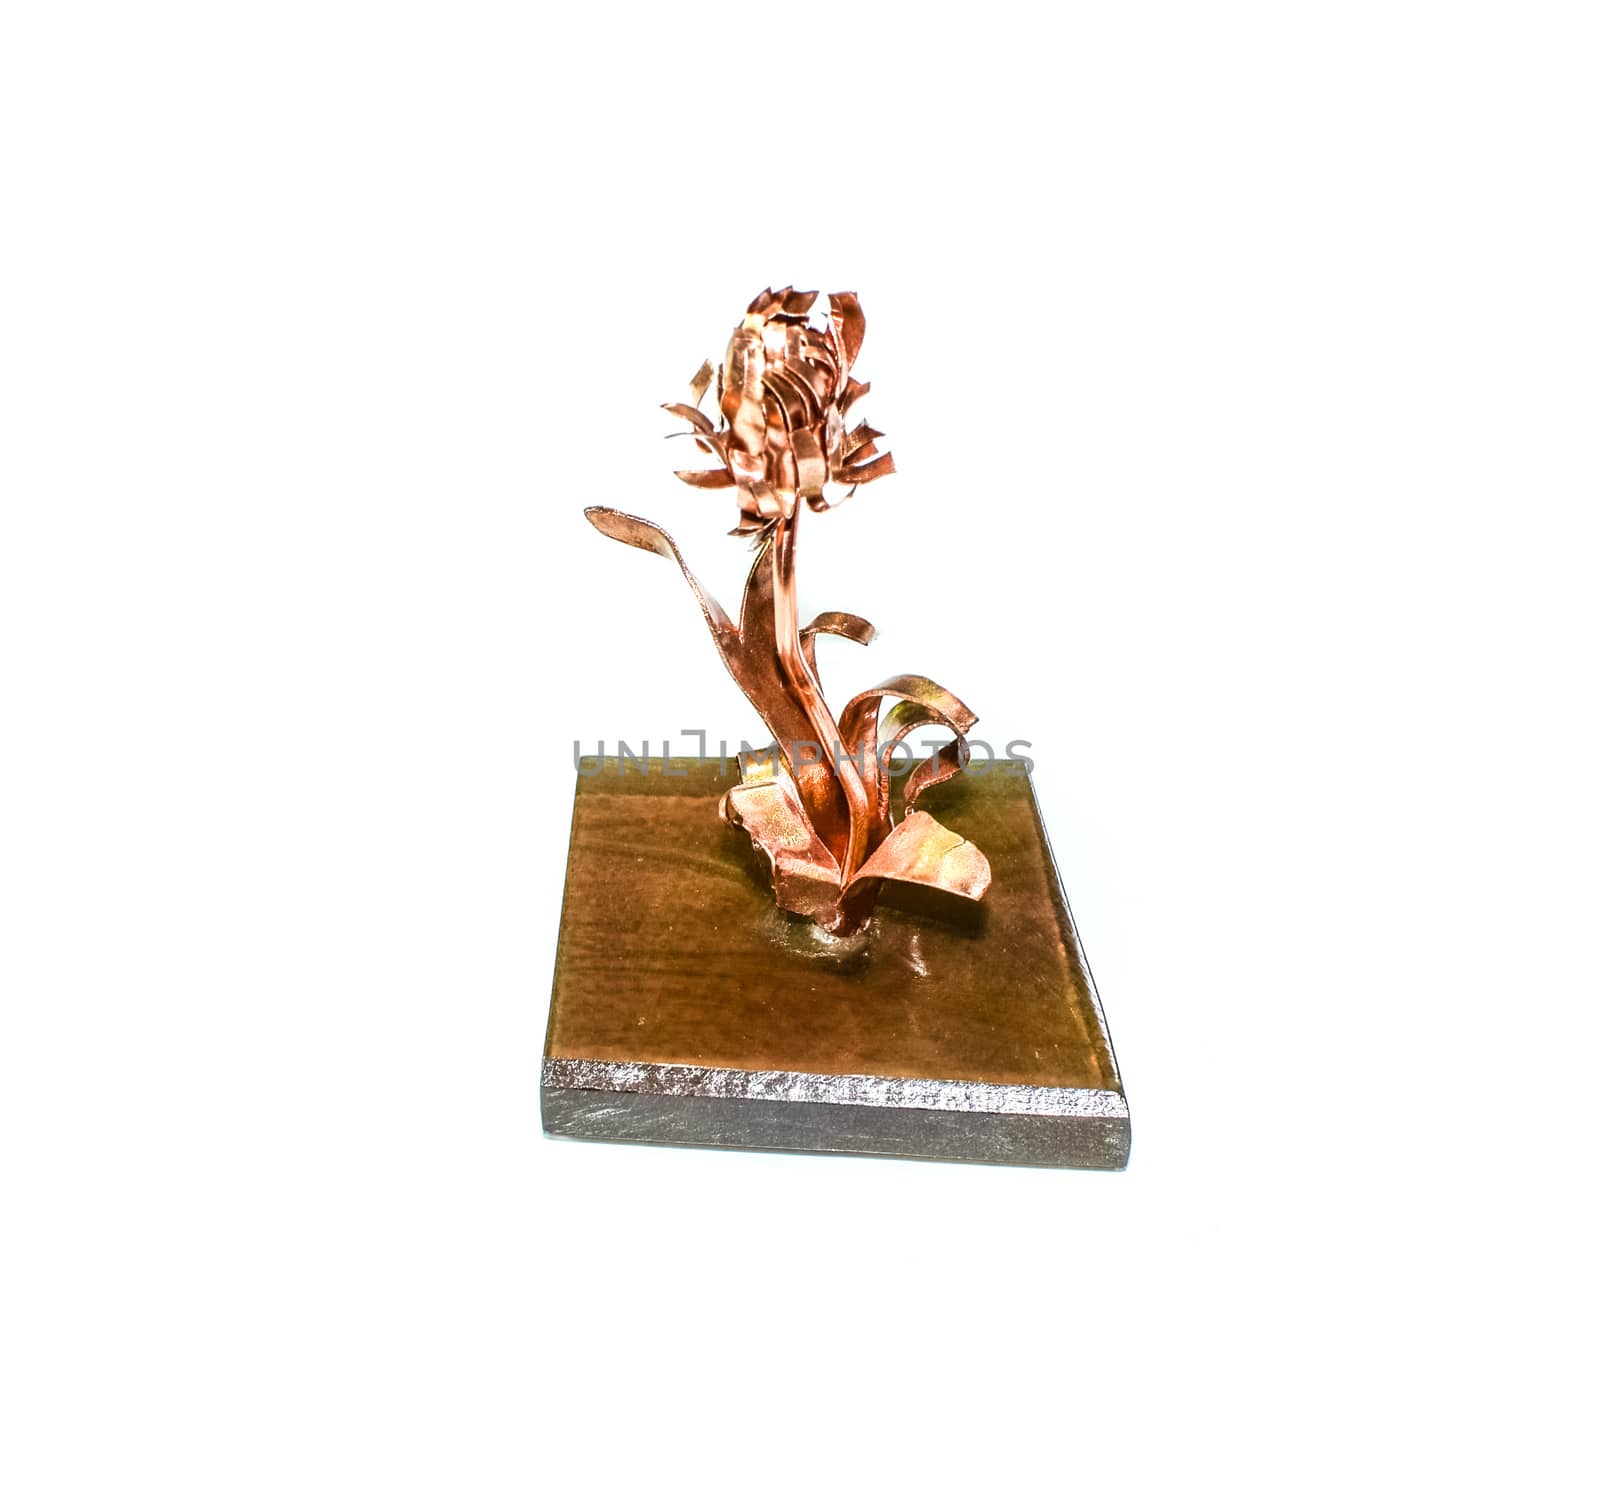 A copper-forged rose on a stand. A beautiful copper product.